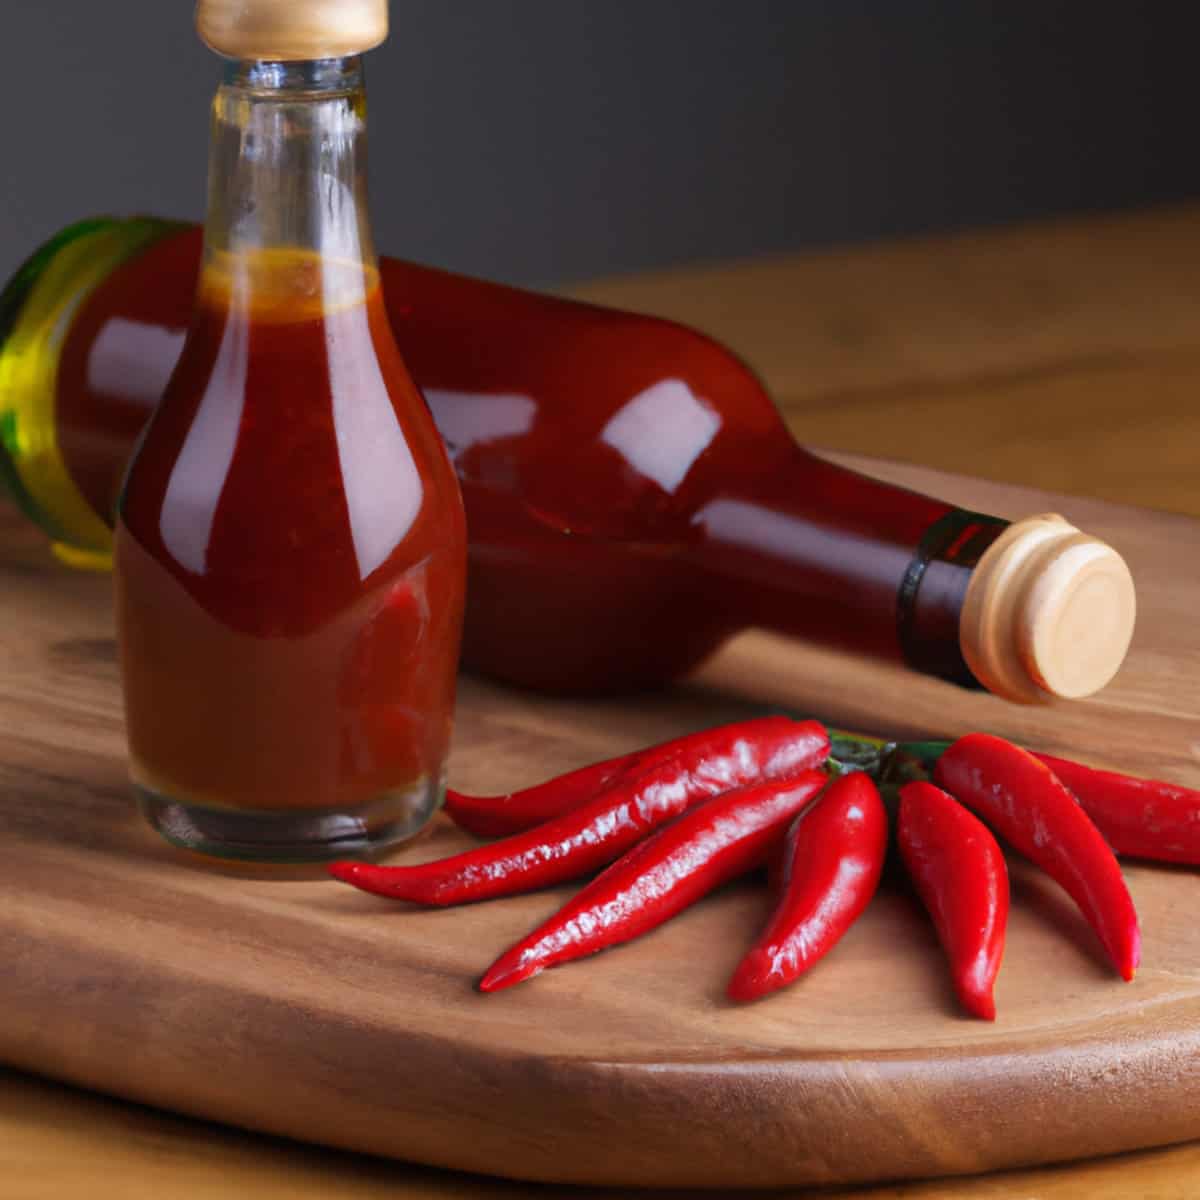 Worcestershire Sauce vs Hot Sauce vs Tabasco | Spicy or Not?